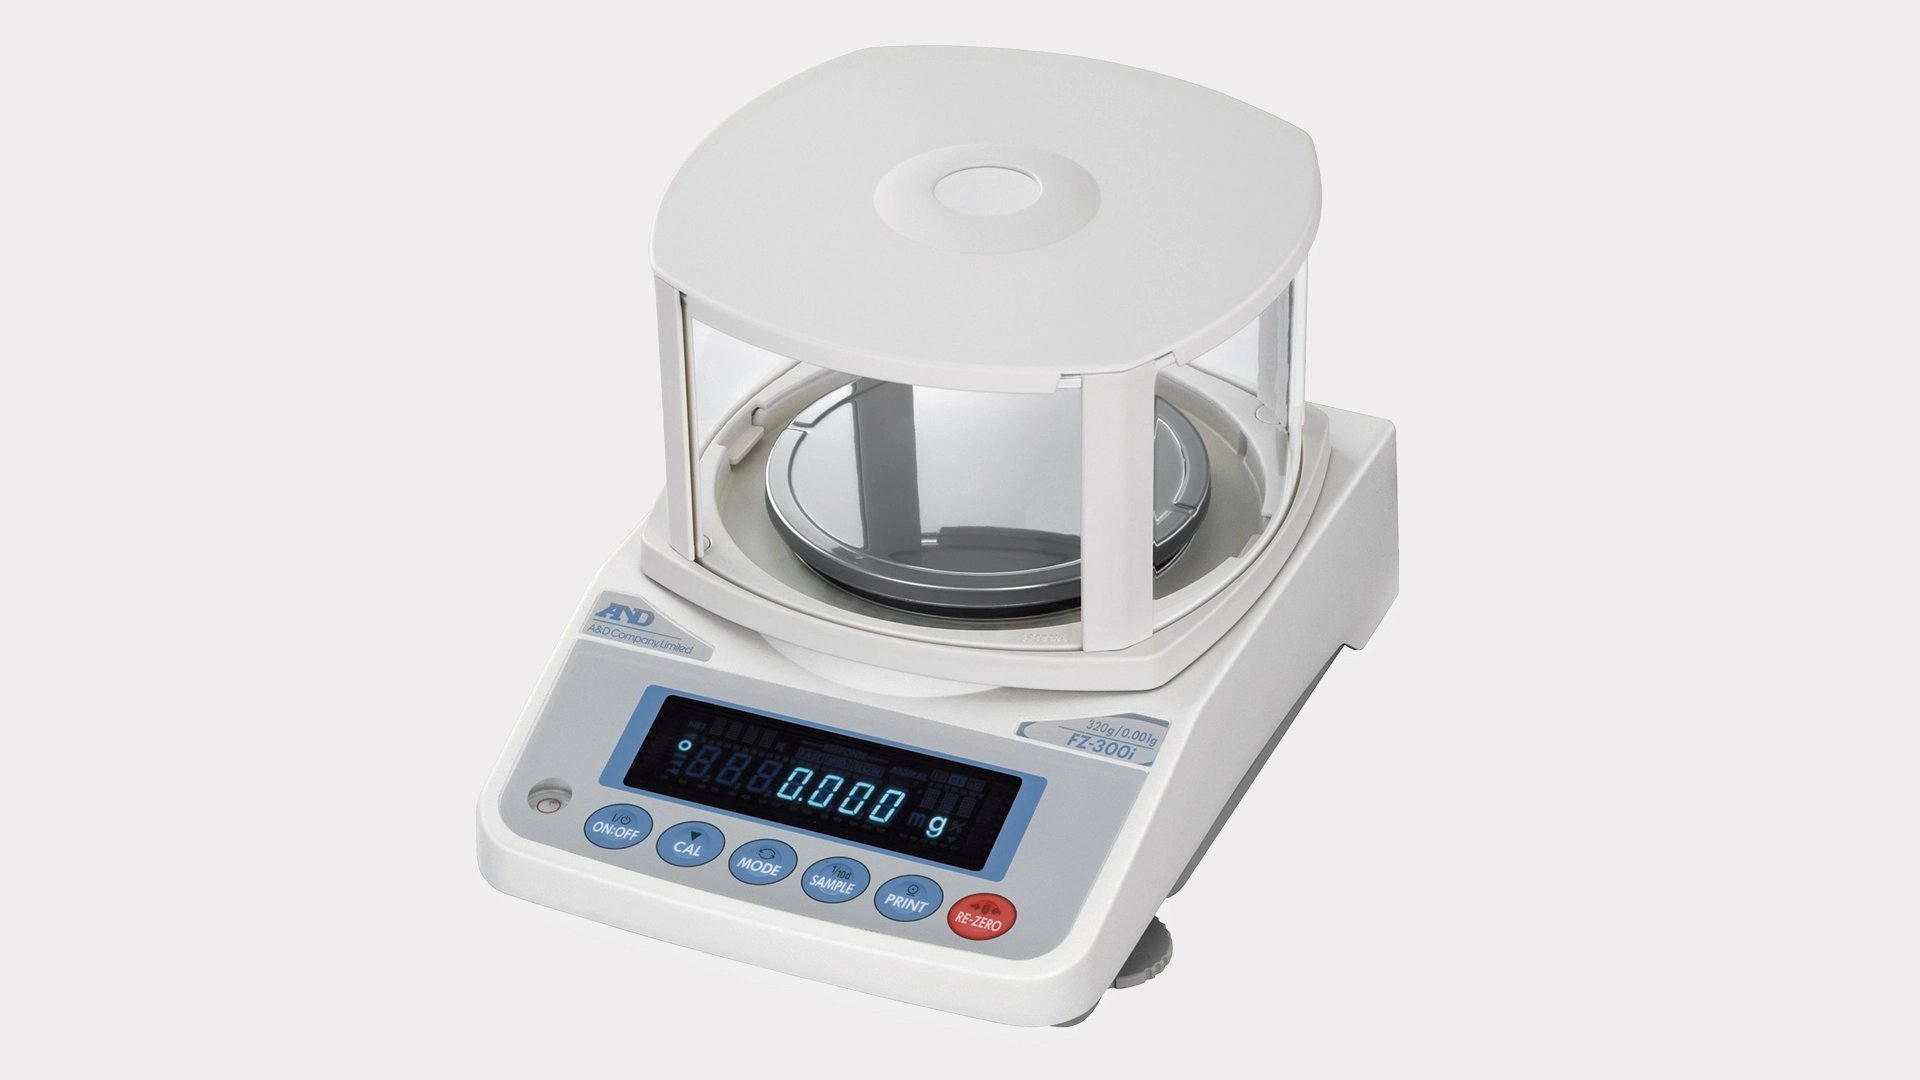 GF-300 Precision Scale from A&D Weighing